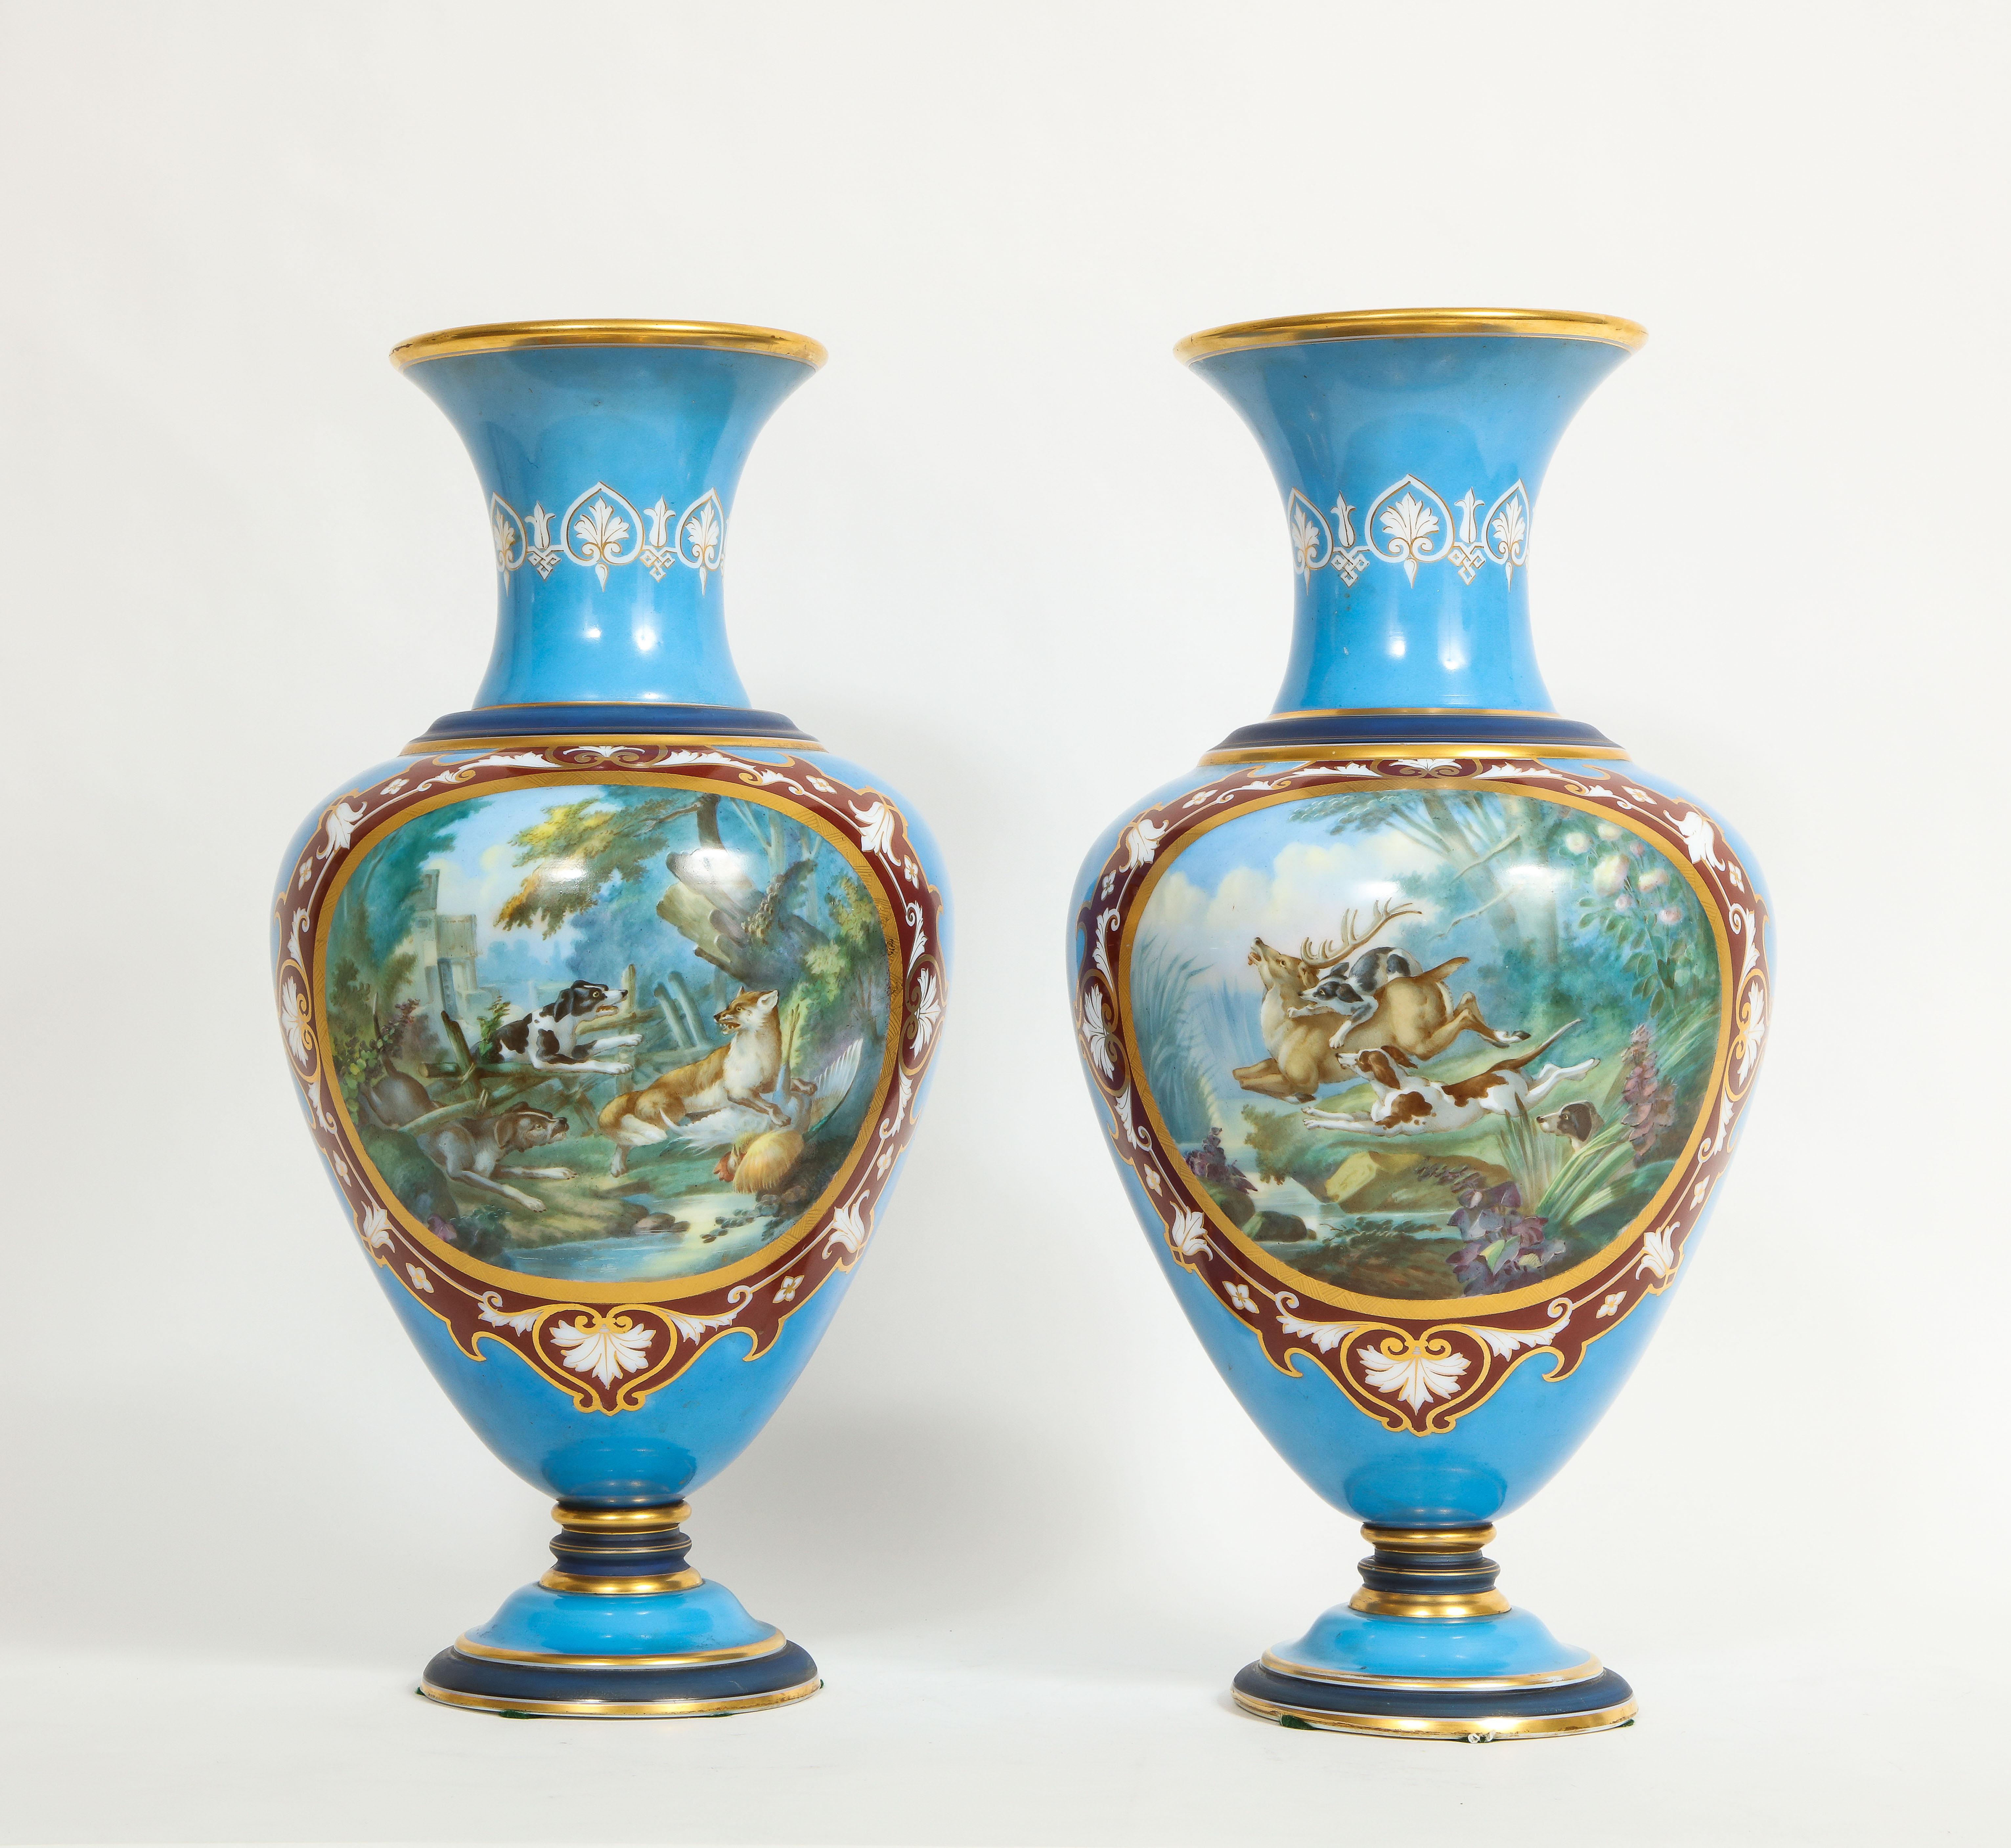 A Fantastic and Large Pair of French 19th Century Baccarat Enameled Opalescent Vases. Each vase is of baluster form, with enameled paintings of large hunting scenes of hounds chasing either a deer or a fox in a woodland, reserved within an iron-red